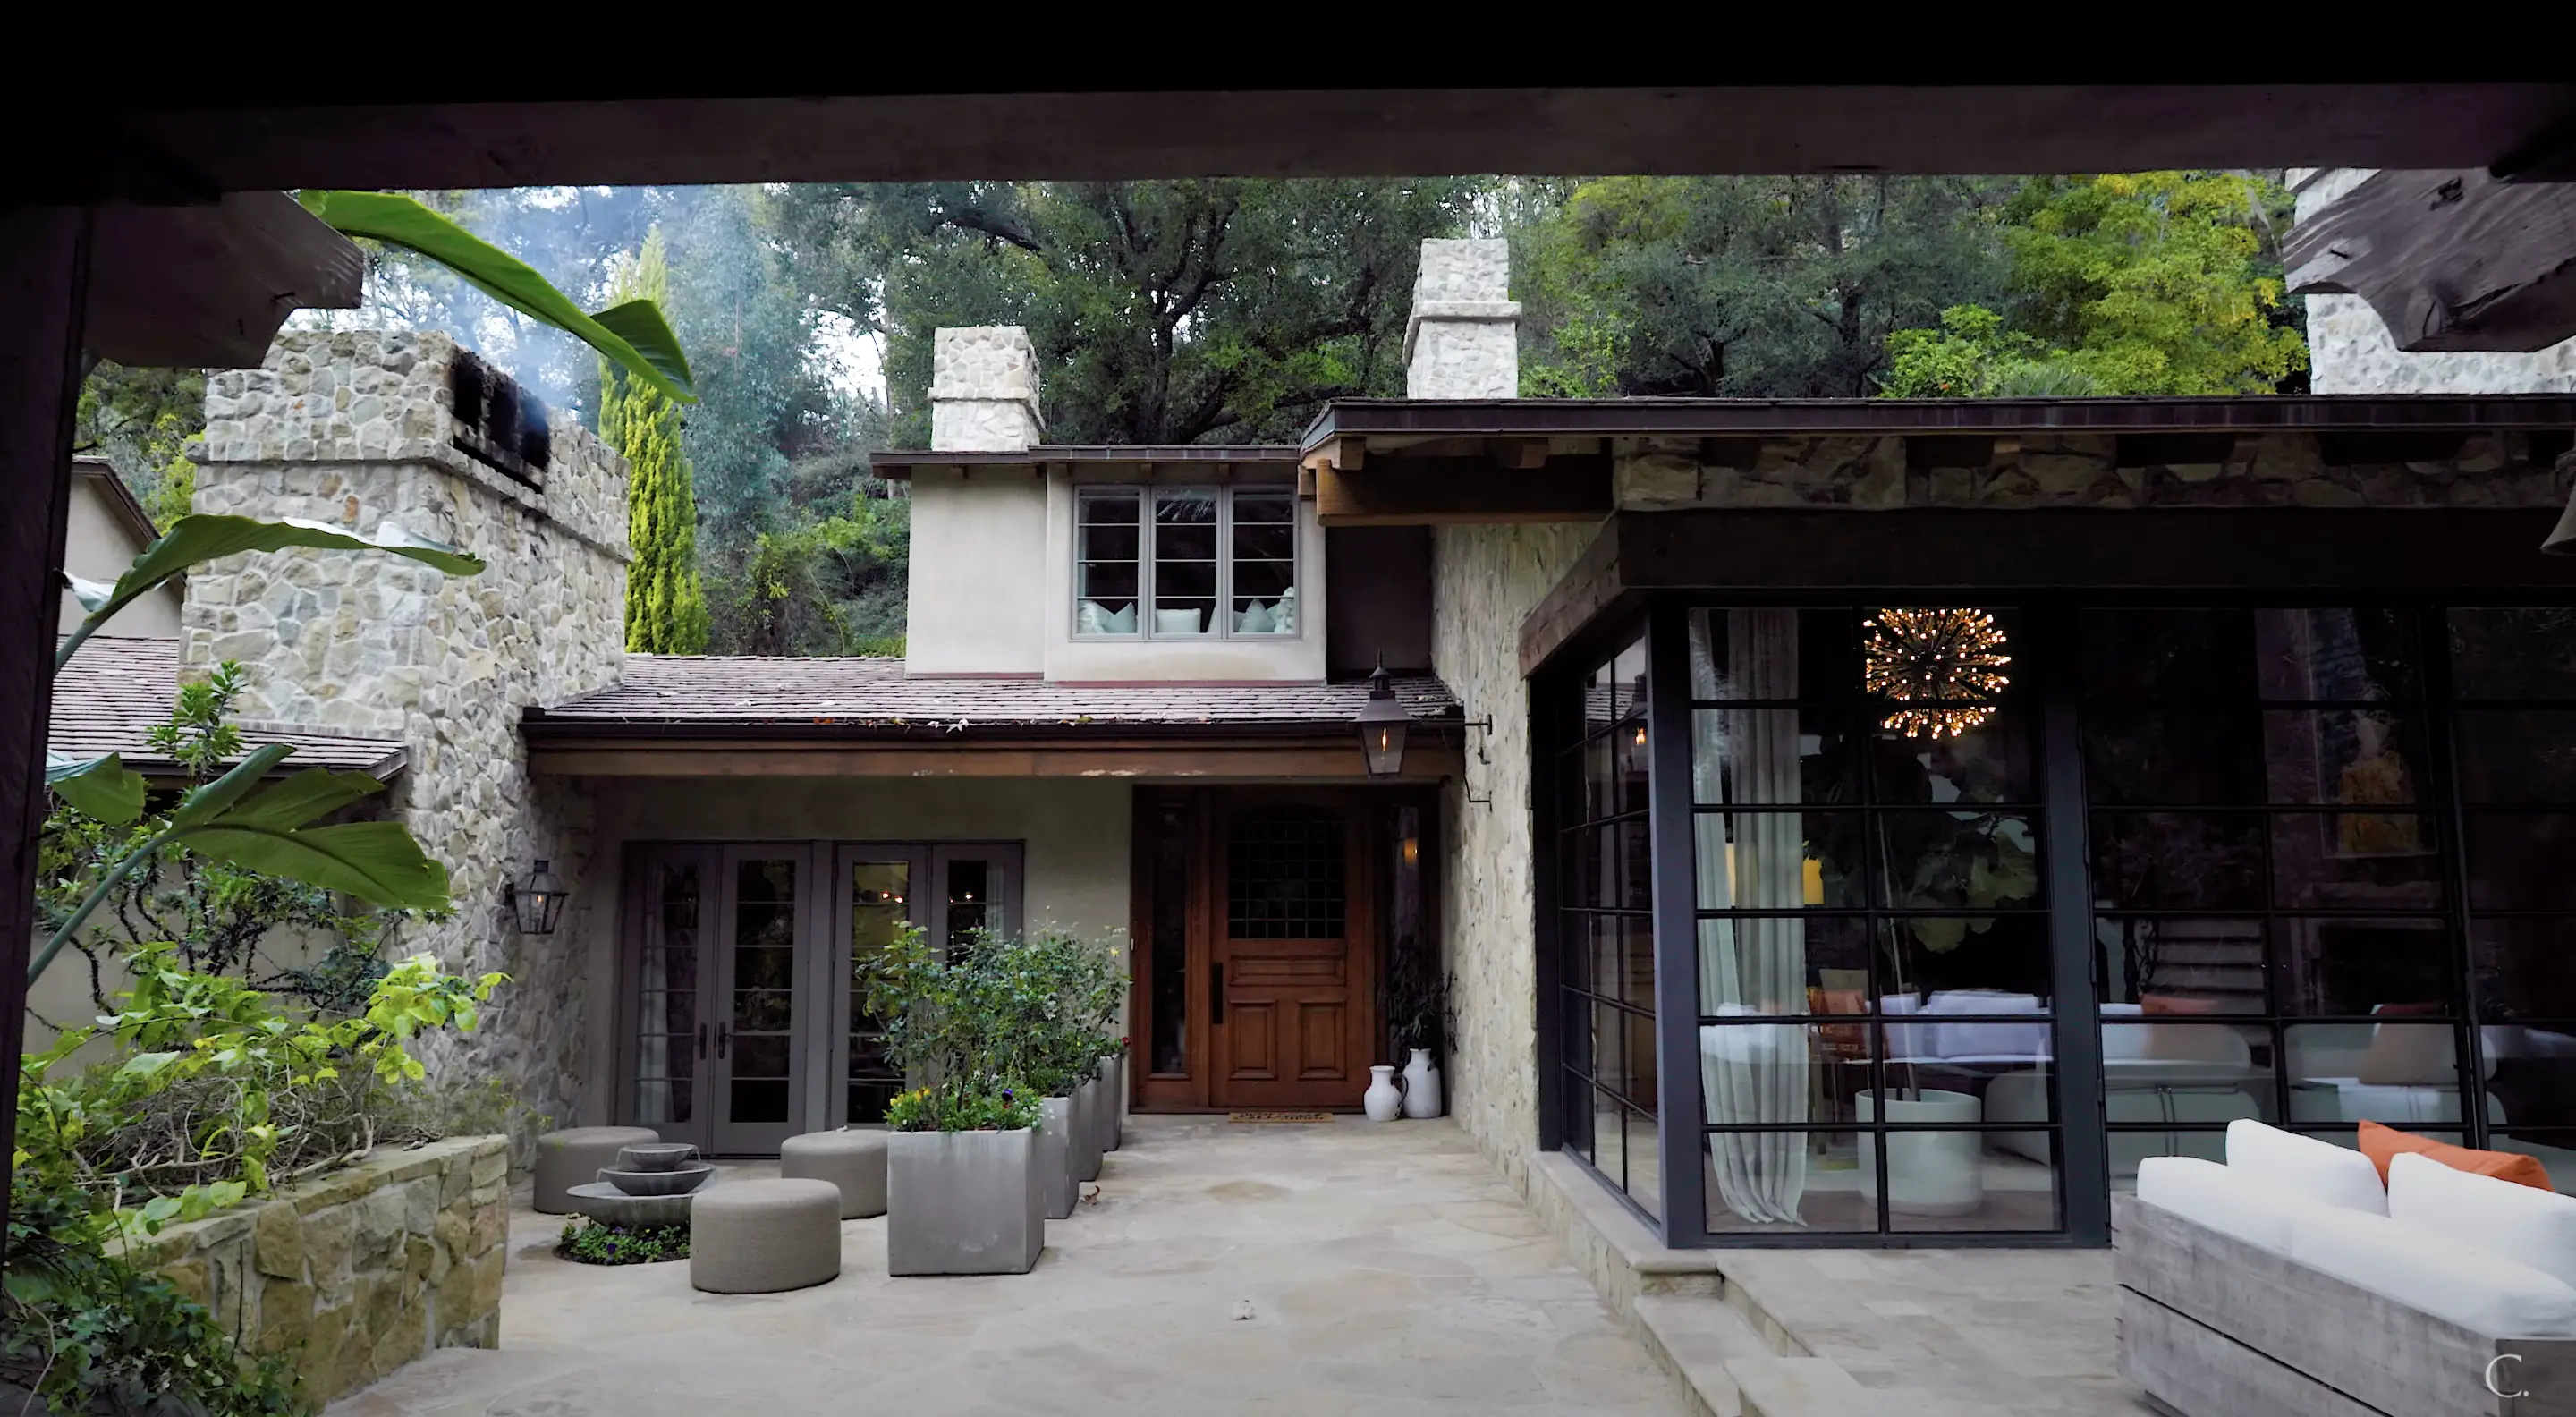 Jennifer Lopez's former mansion in Bel-Air, California, from a video dated February 1, 2023 | Source: Youtube.com/@carolwoodrealestate